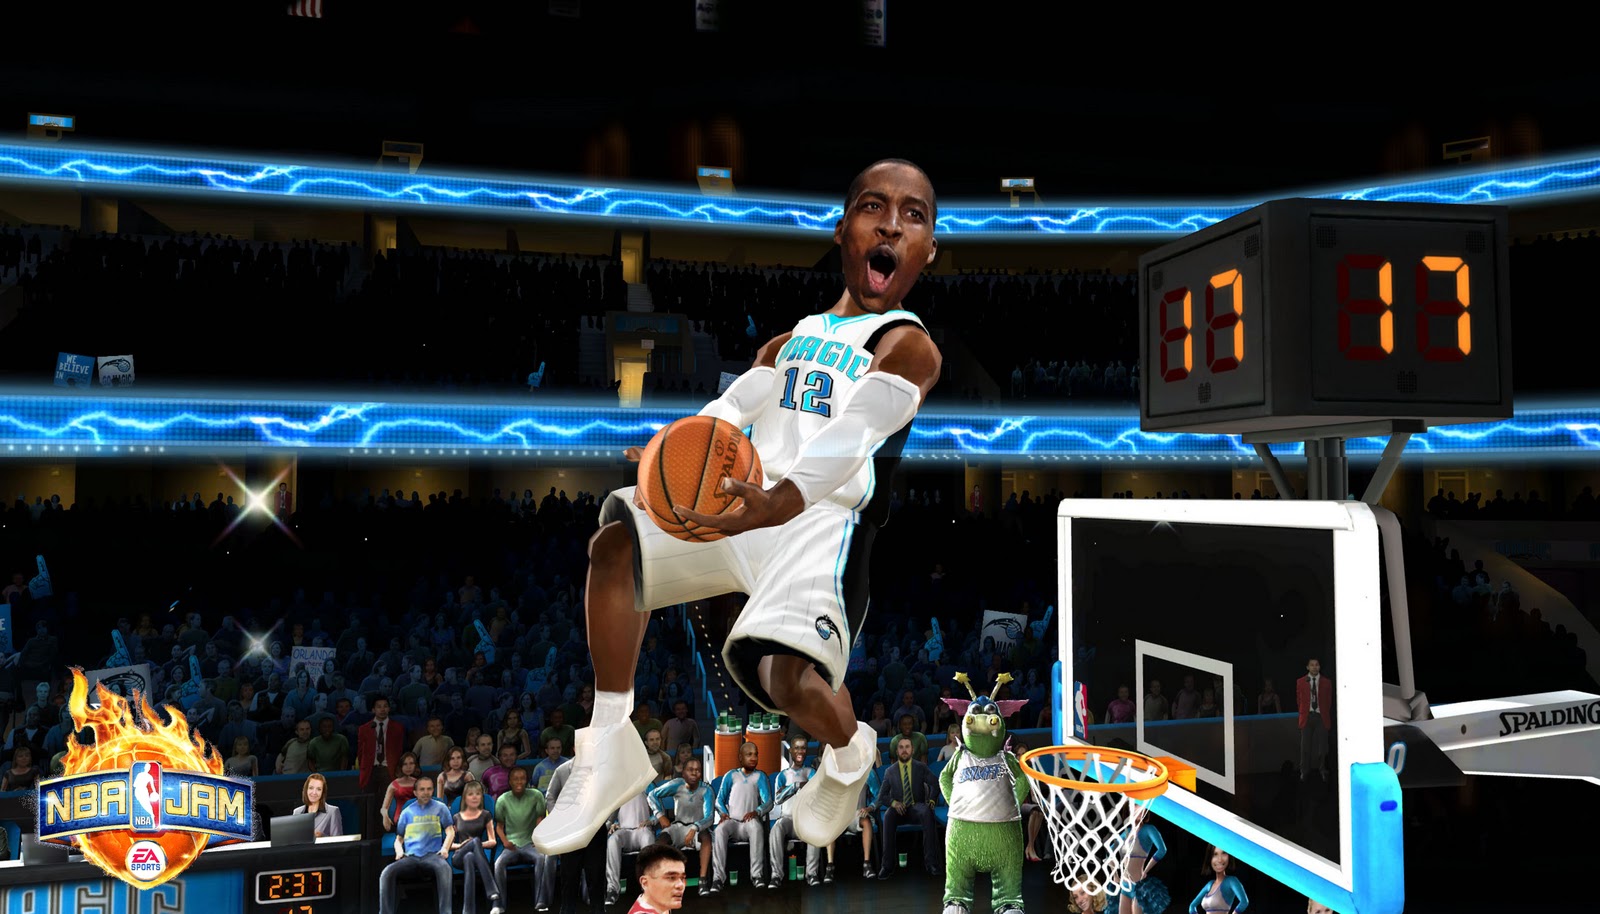 TheAngrySpark NBA Jam Online Play detailed and launch Date Confirmed for Xbox 360 and PS3